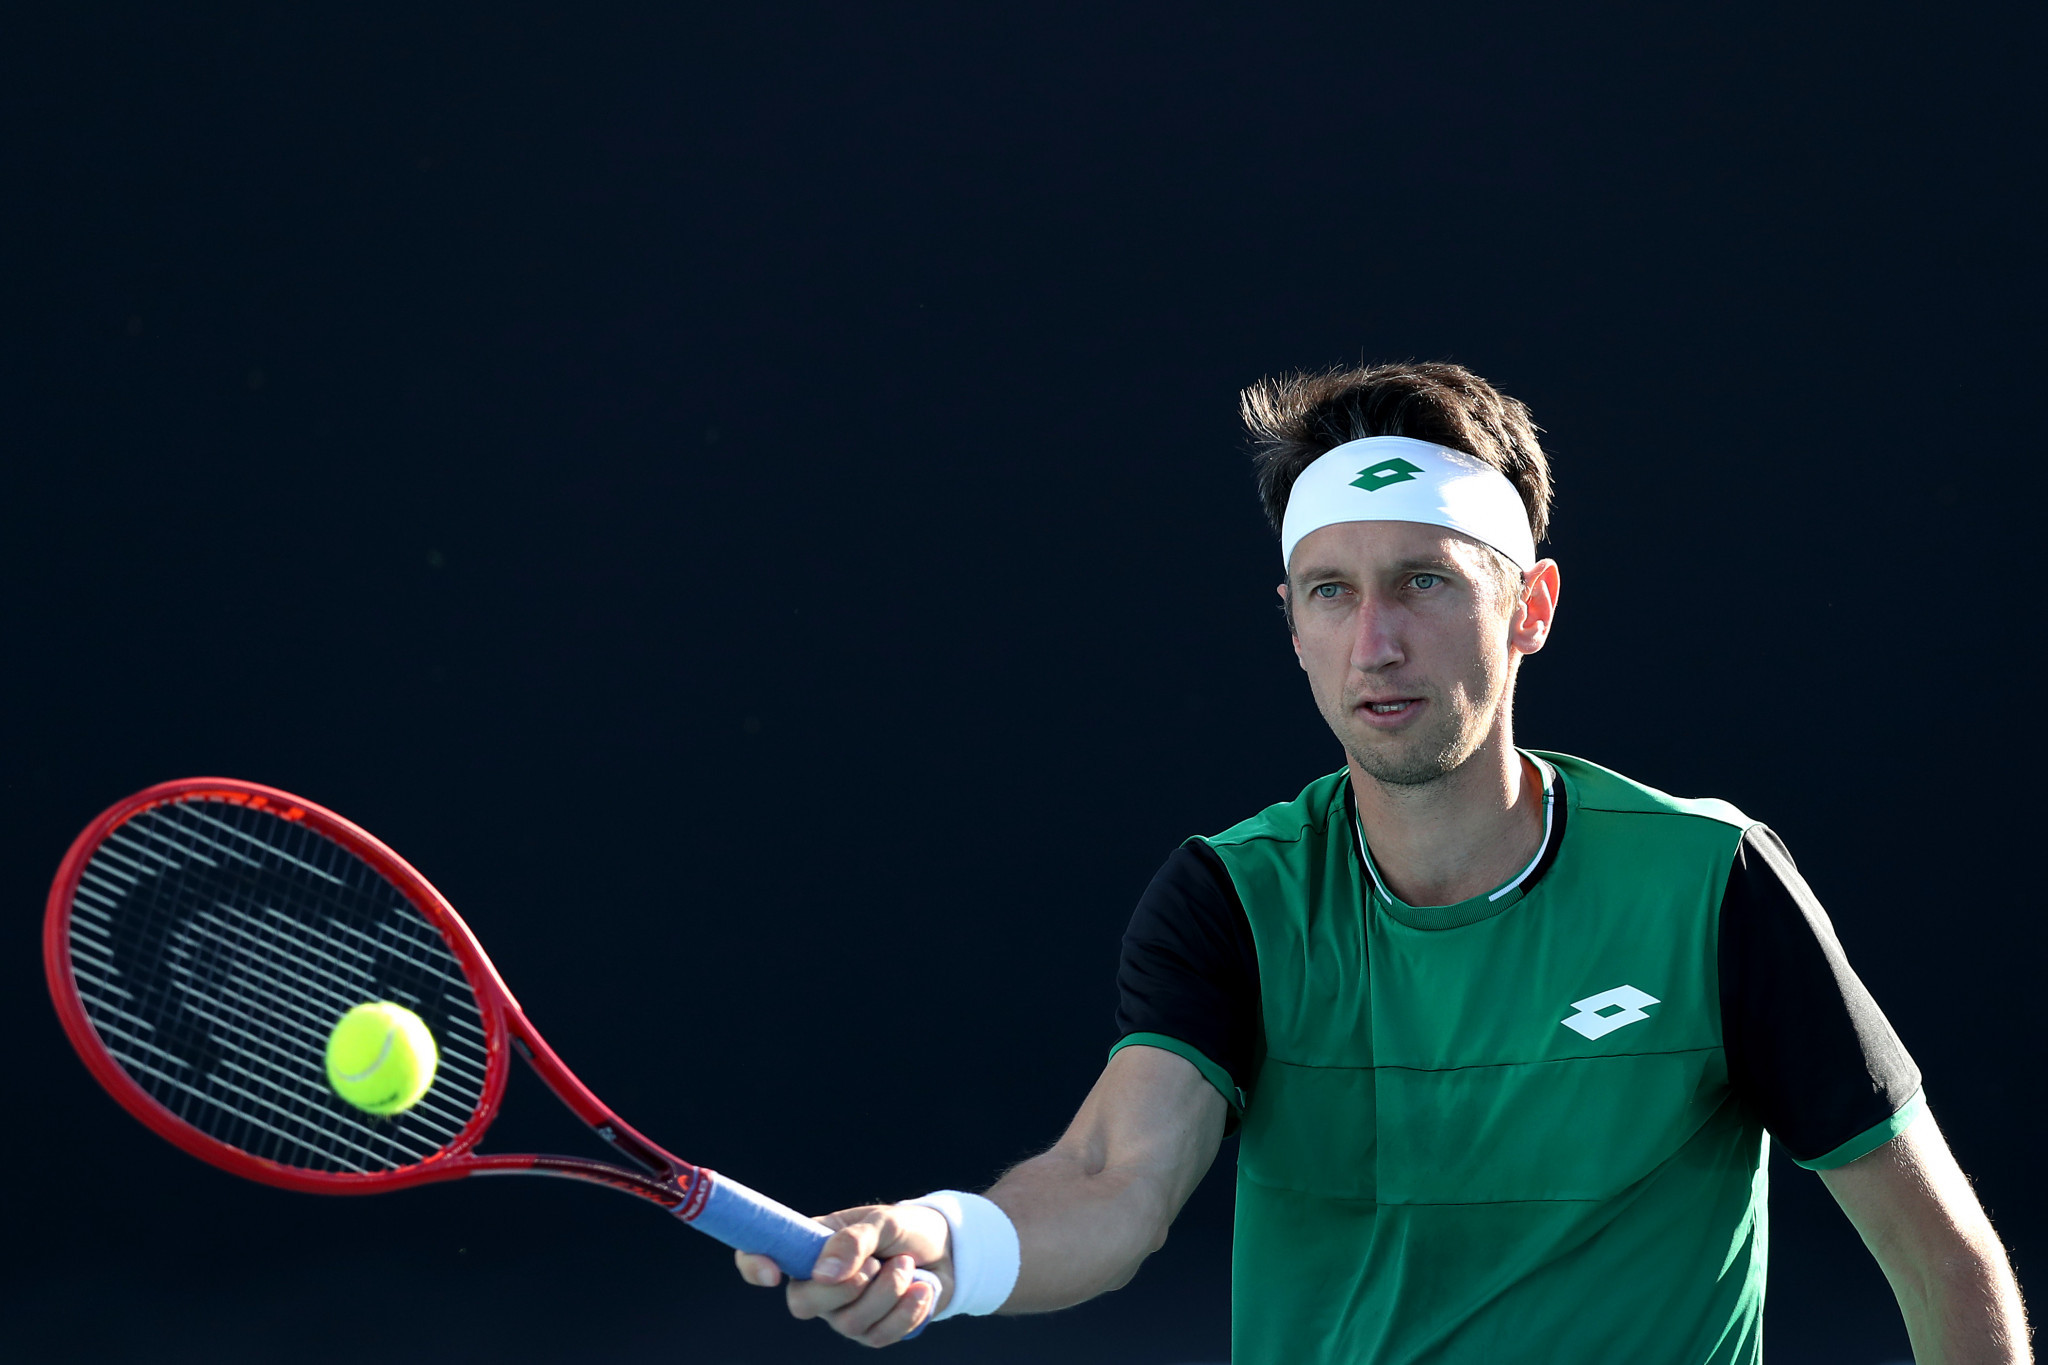 Ukraine's Sergiy Stakhovsky said he was "grateful" for Wimbledon's ban on Russian and Belarusian players at this year's tournament ©Getty Images